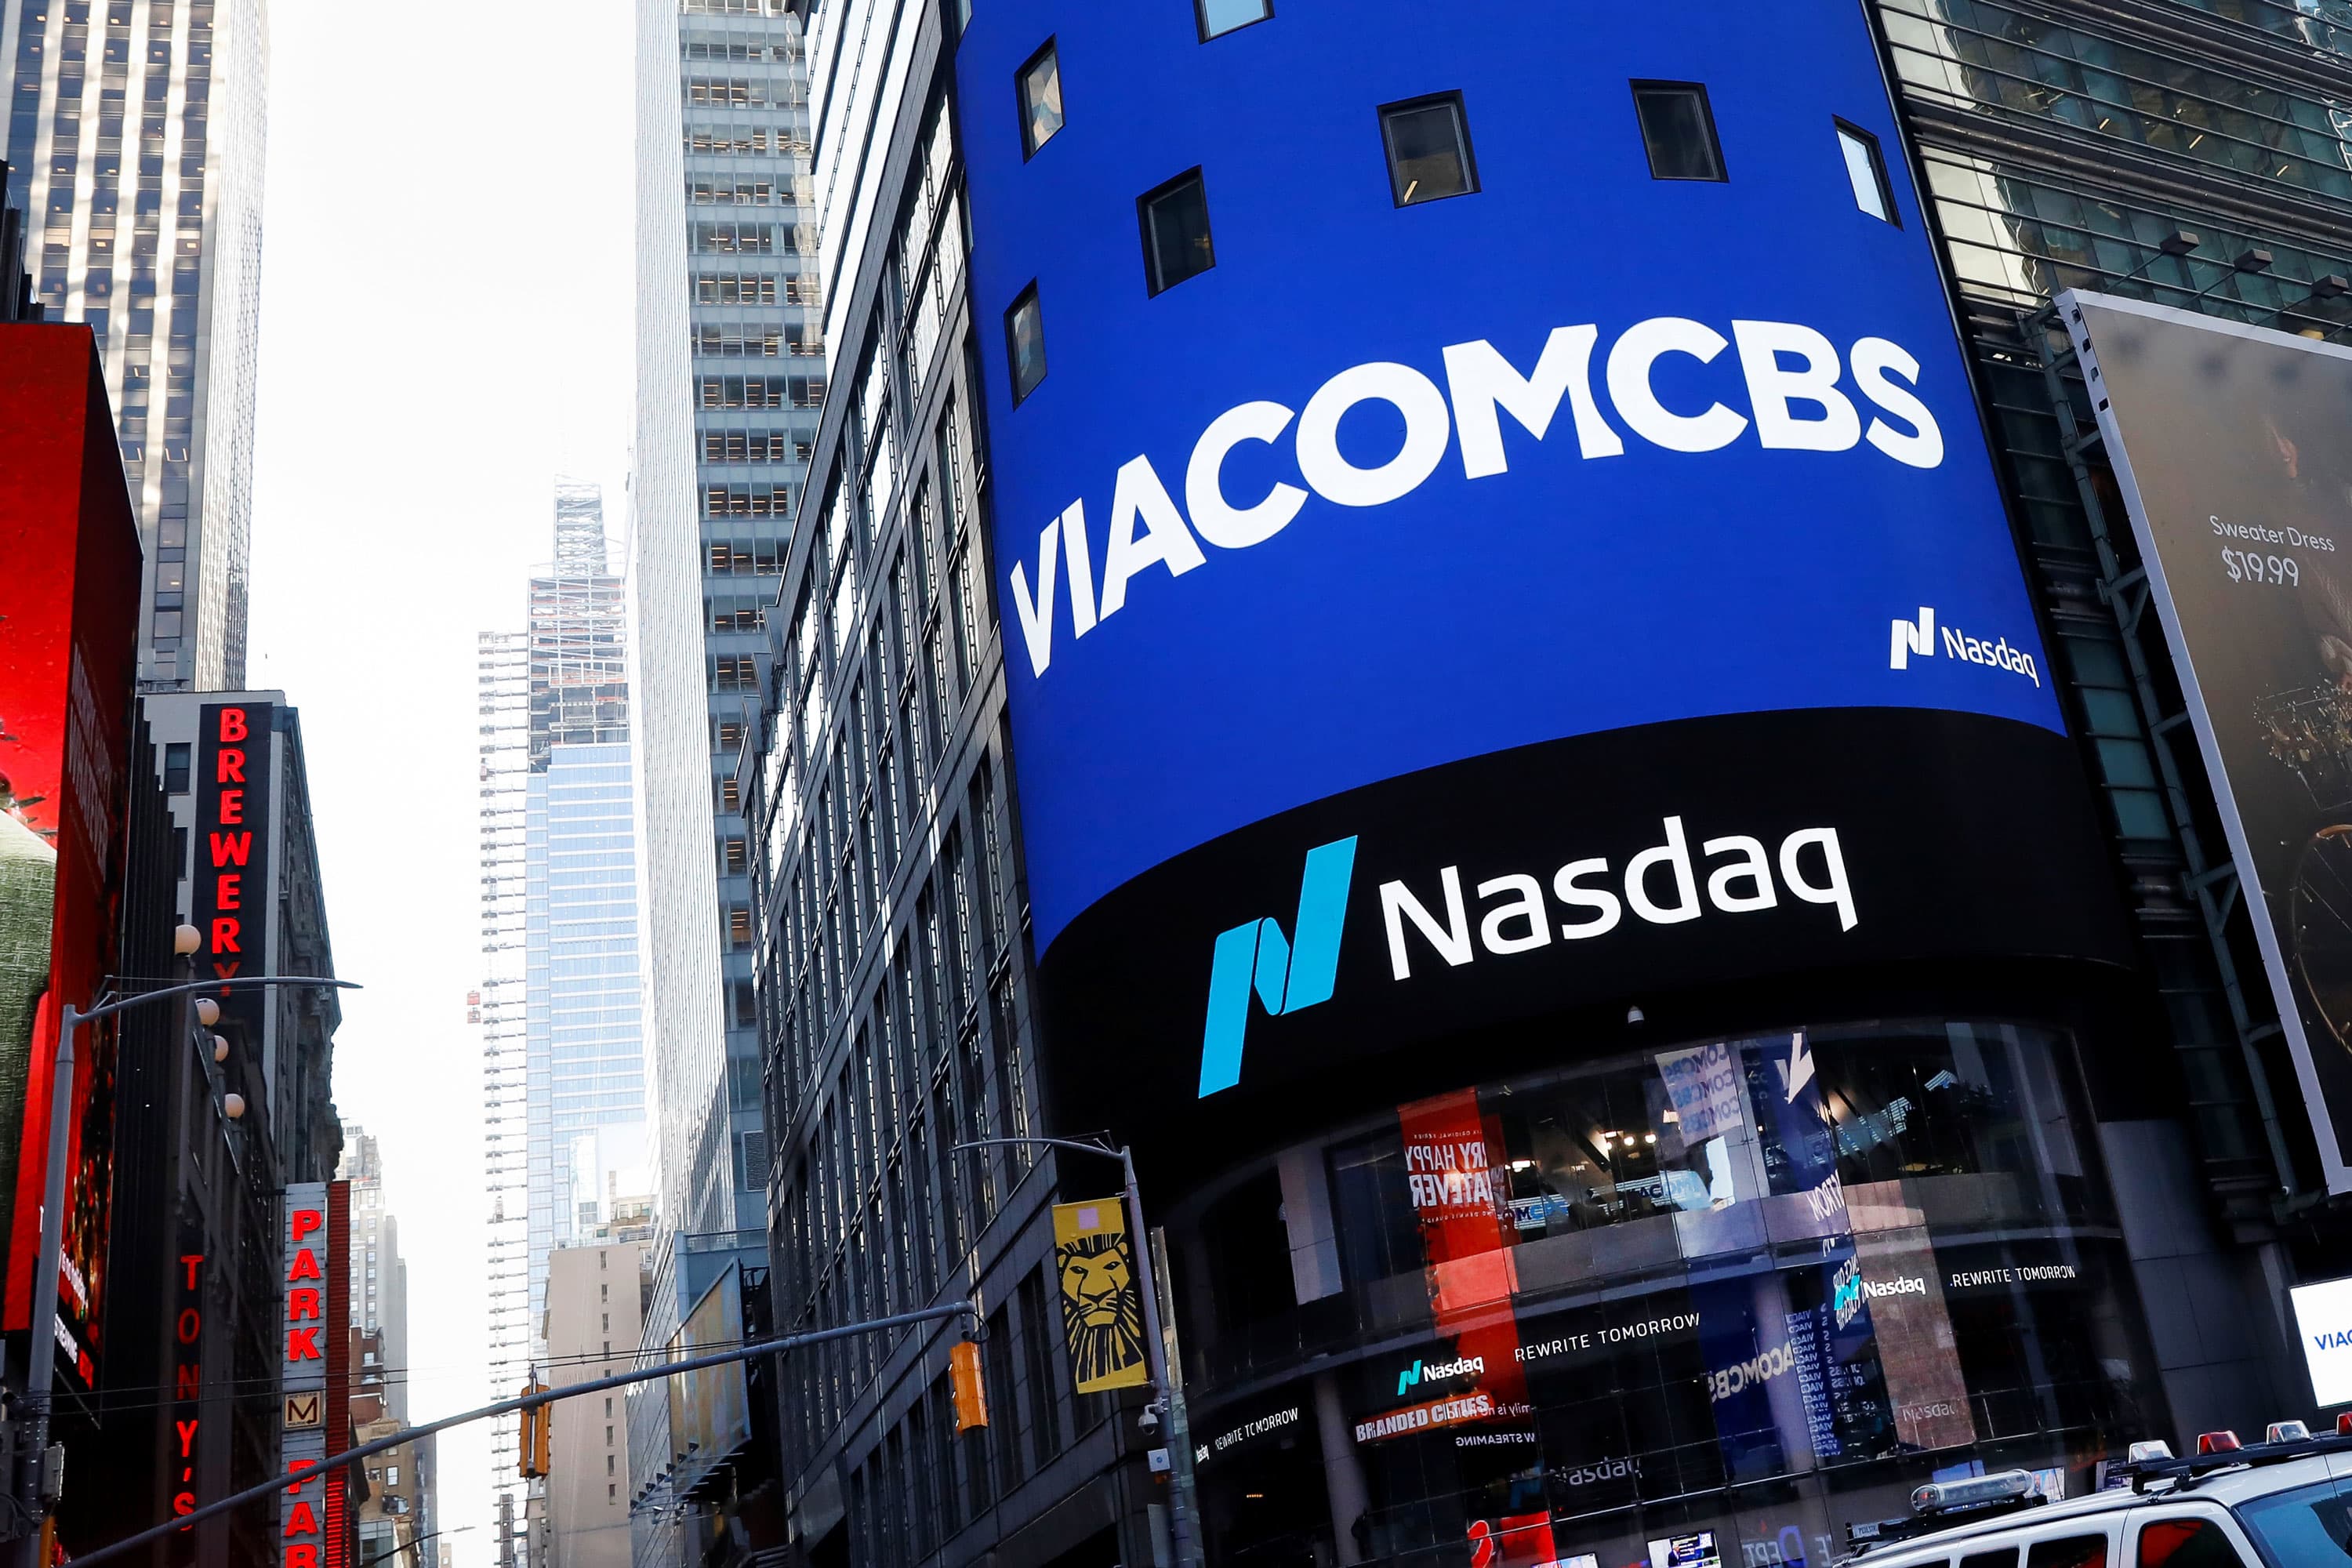 Viacom shares plummet as investors express doubts about streaming performance